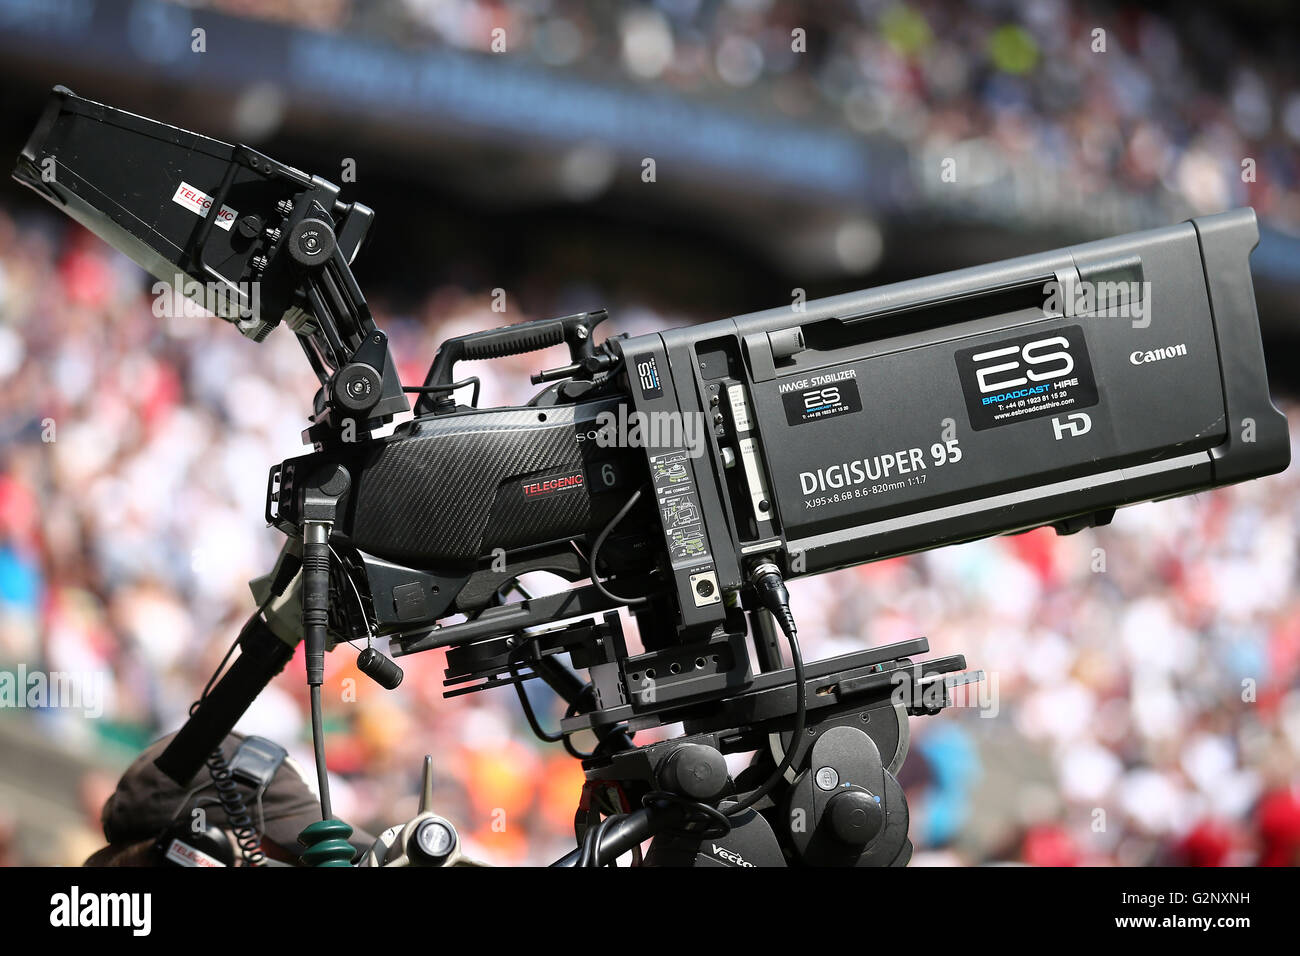 A broadcast television camera is pictured at a rugby match. London. UK. Stock Photo